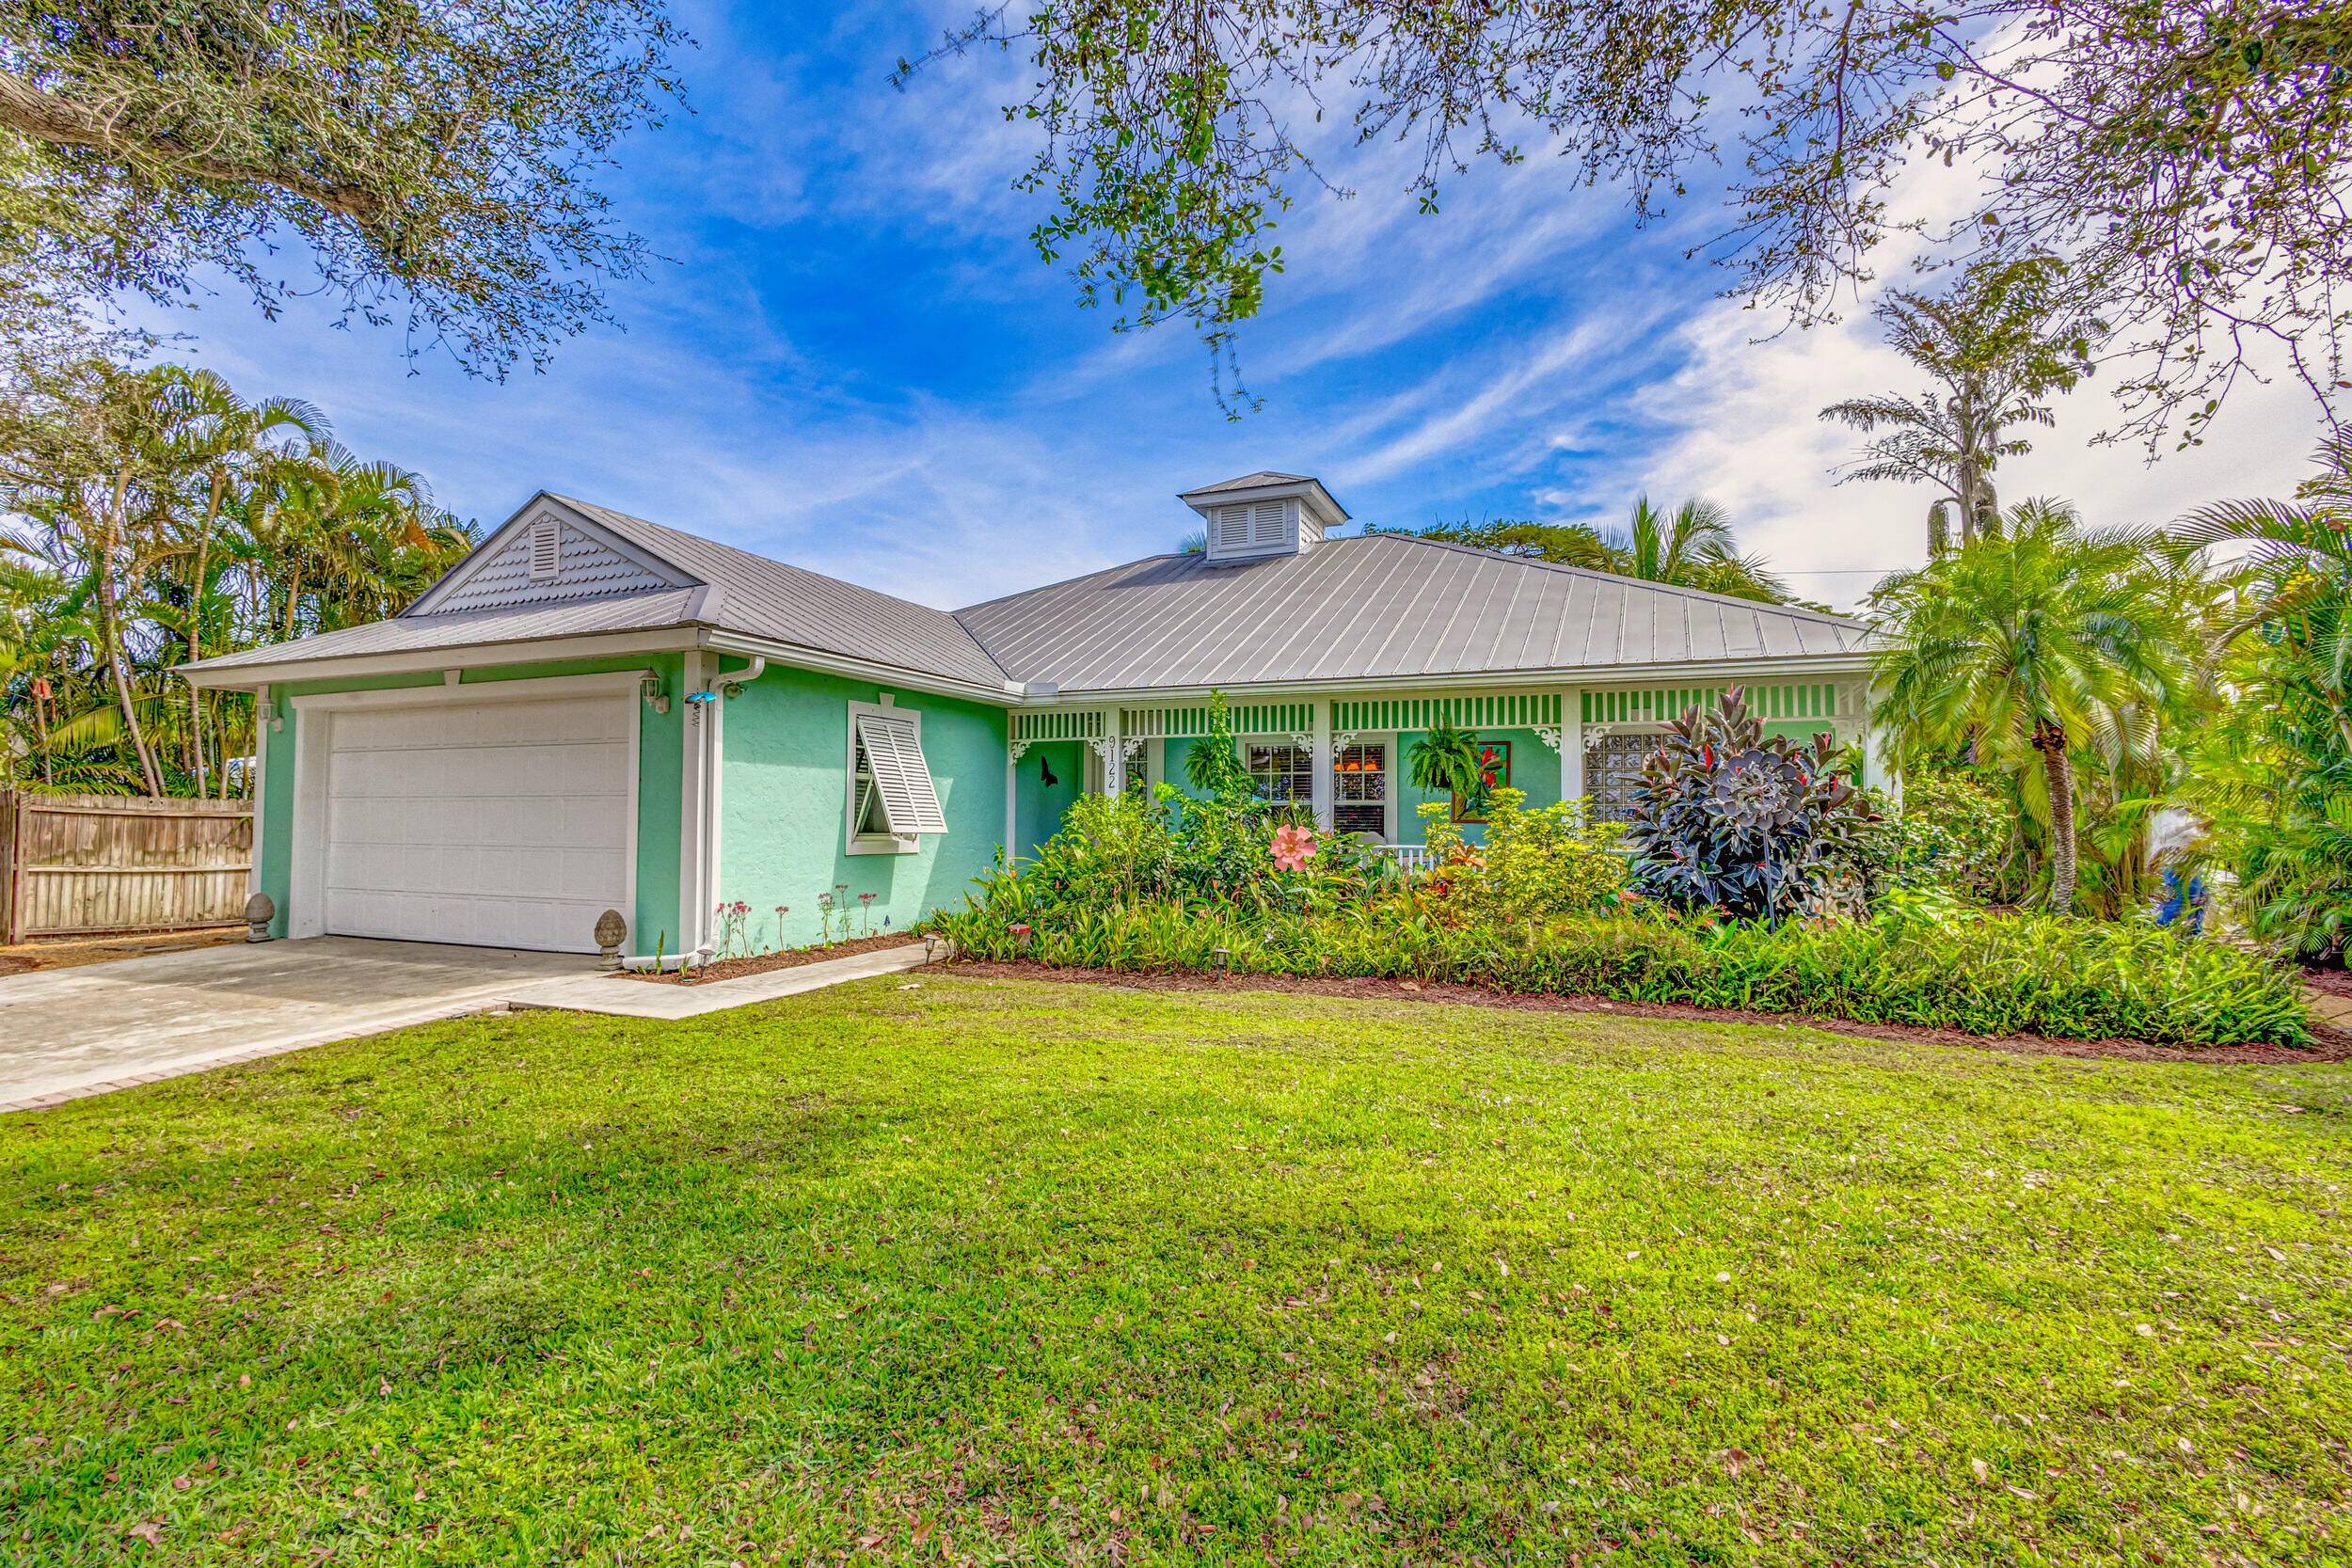 KEY WEST STYLE HOME 1 2 MILE TO BEACH WALK OR BIKE RIDE, ALSO 5 HOMES AWAY TO THE TENNIS, RACQUET, BASEBALL, BASKETBALL FEILDS AND PARK WITH NEARBY GROCERY STORES.